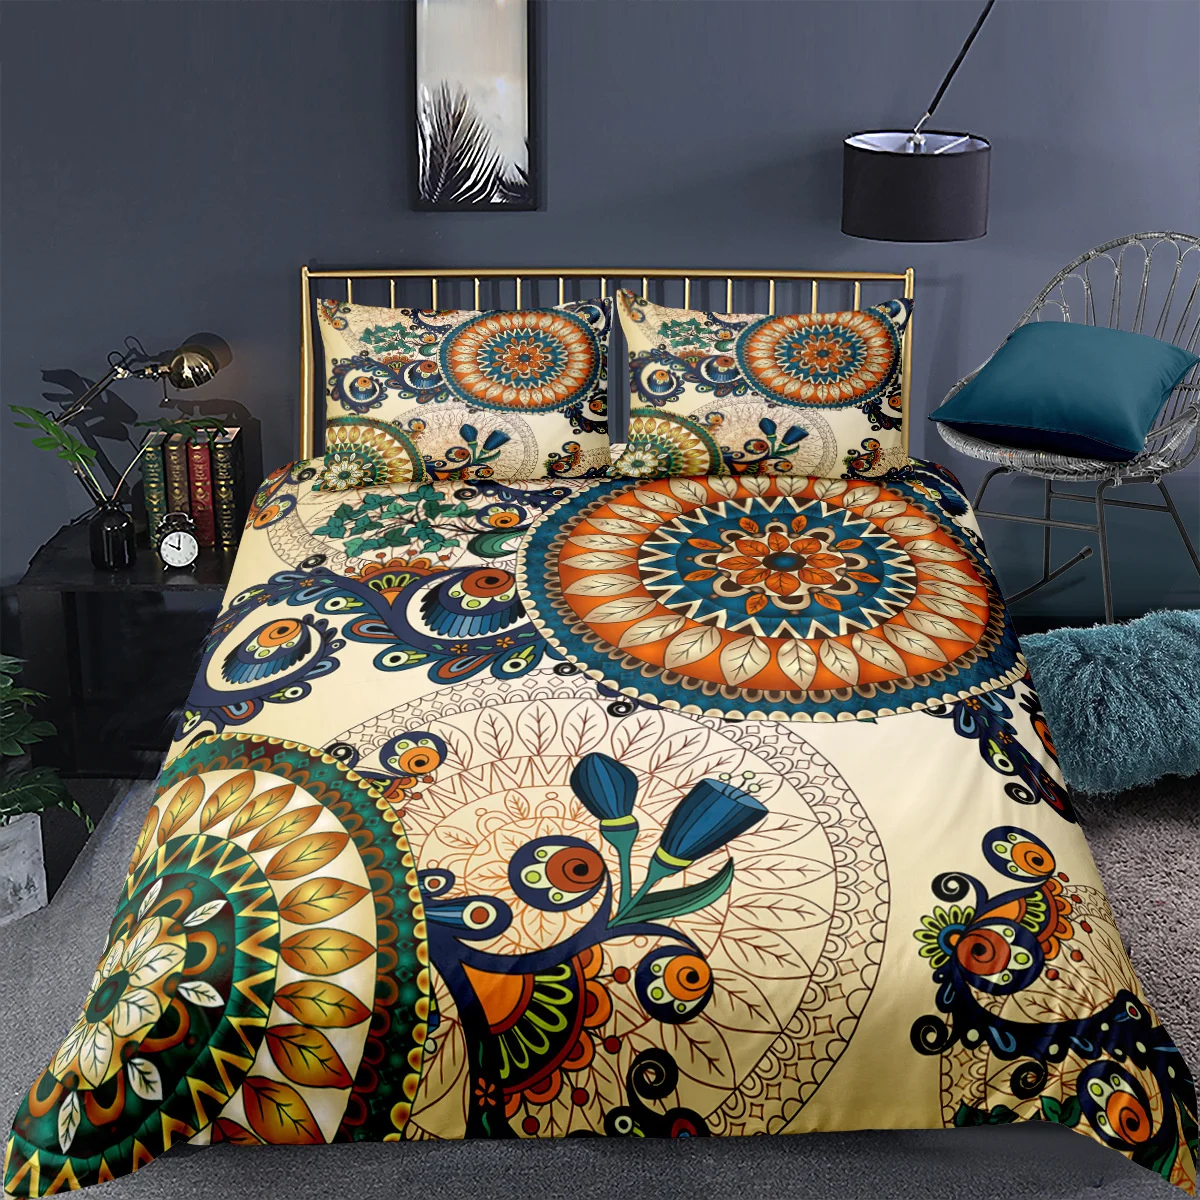 

Bohemian Style Bedding Set King Size Mandala Flower Printing Duvet Cover Home Quilt Cover With Pillowcase Bedclothes Textiles